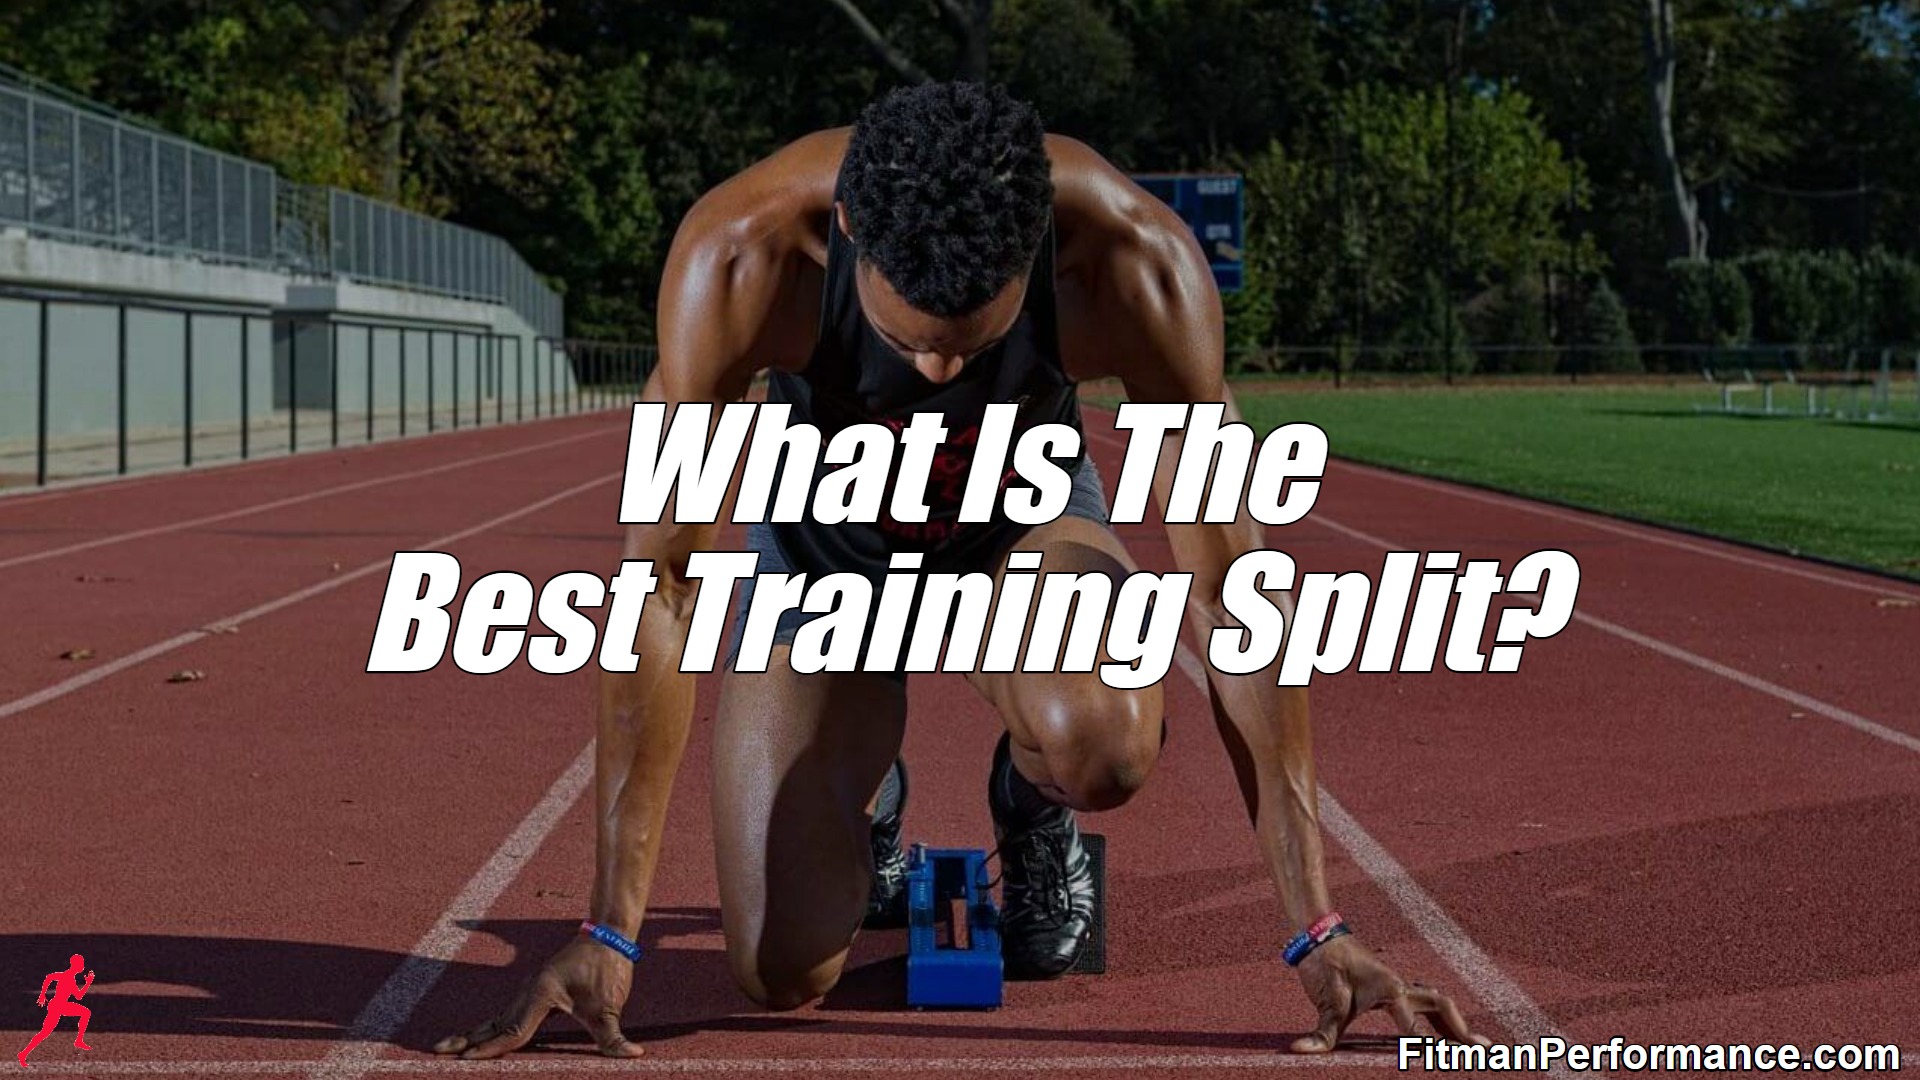 What Is The Best Training Split?